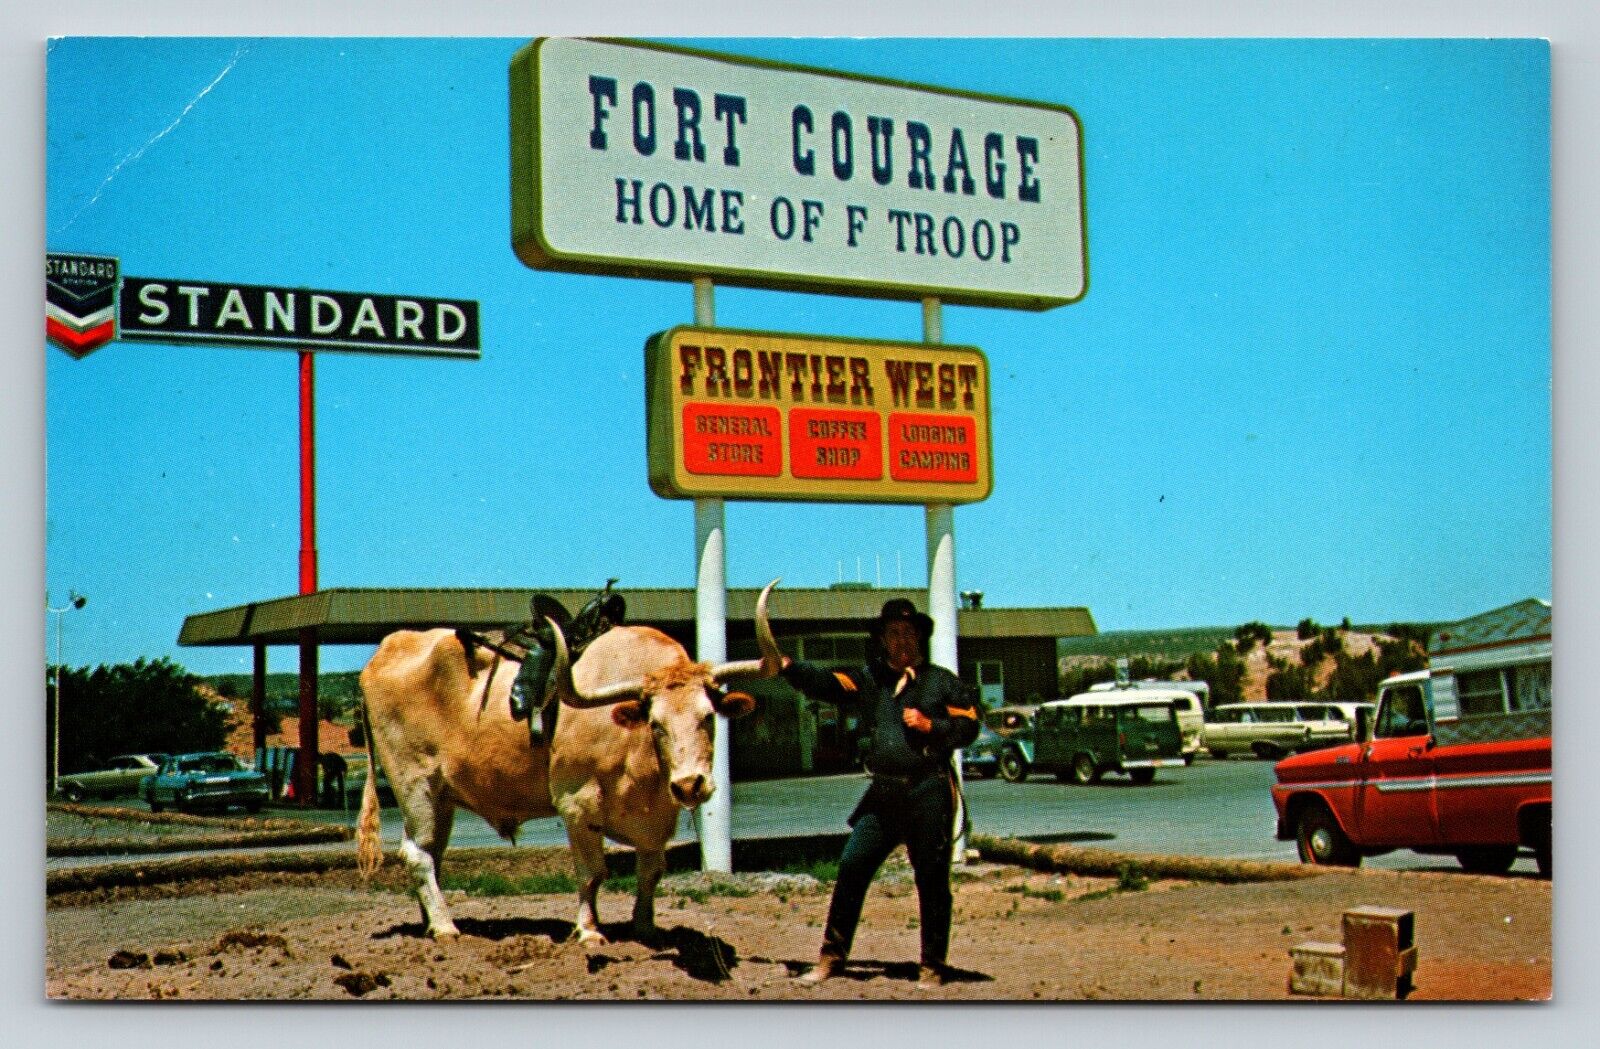 Fort Courage Home of F Troop Old Cars Now In Ruins VINTAGE Postcard